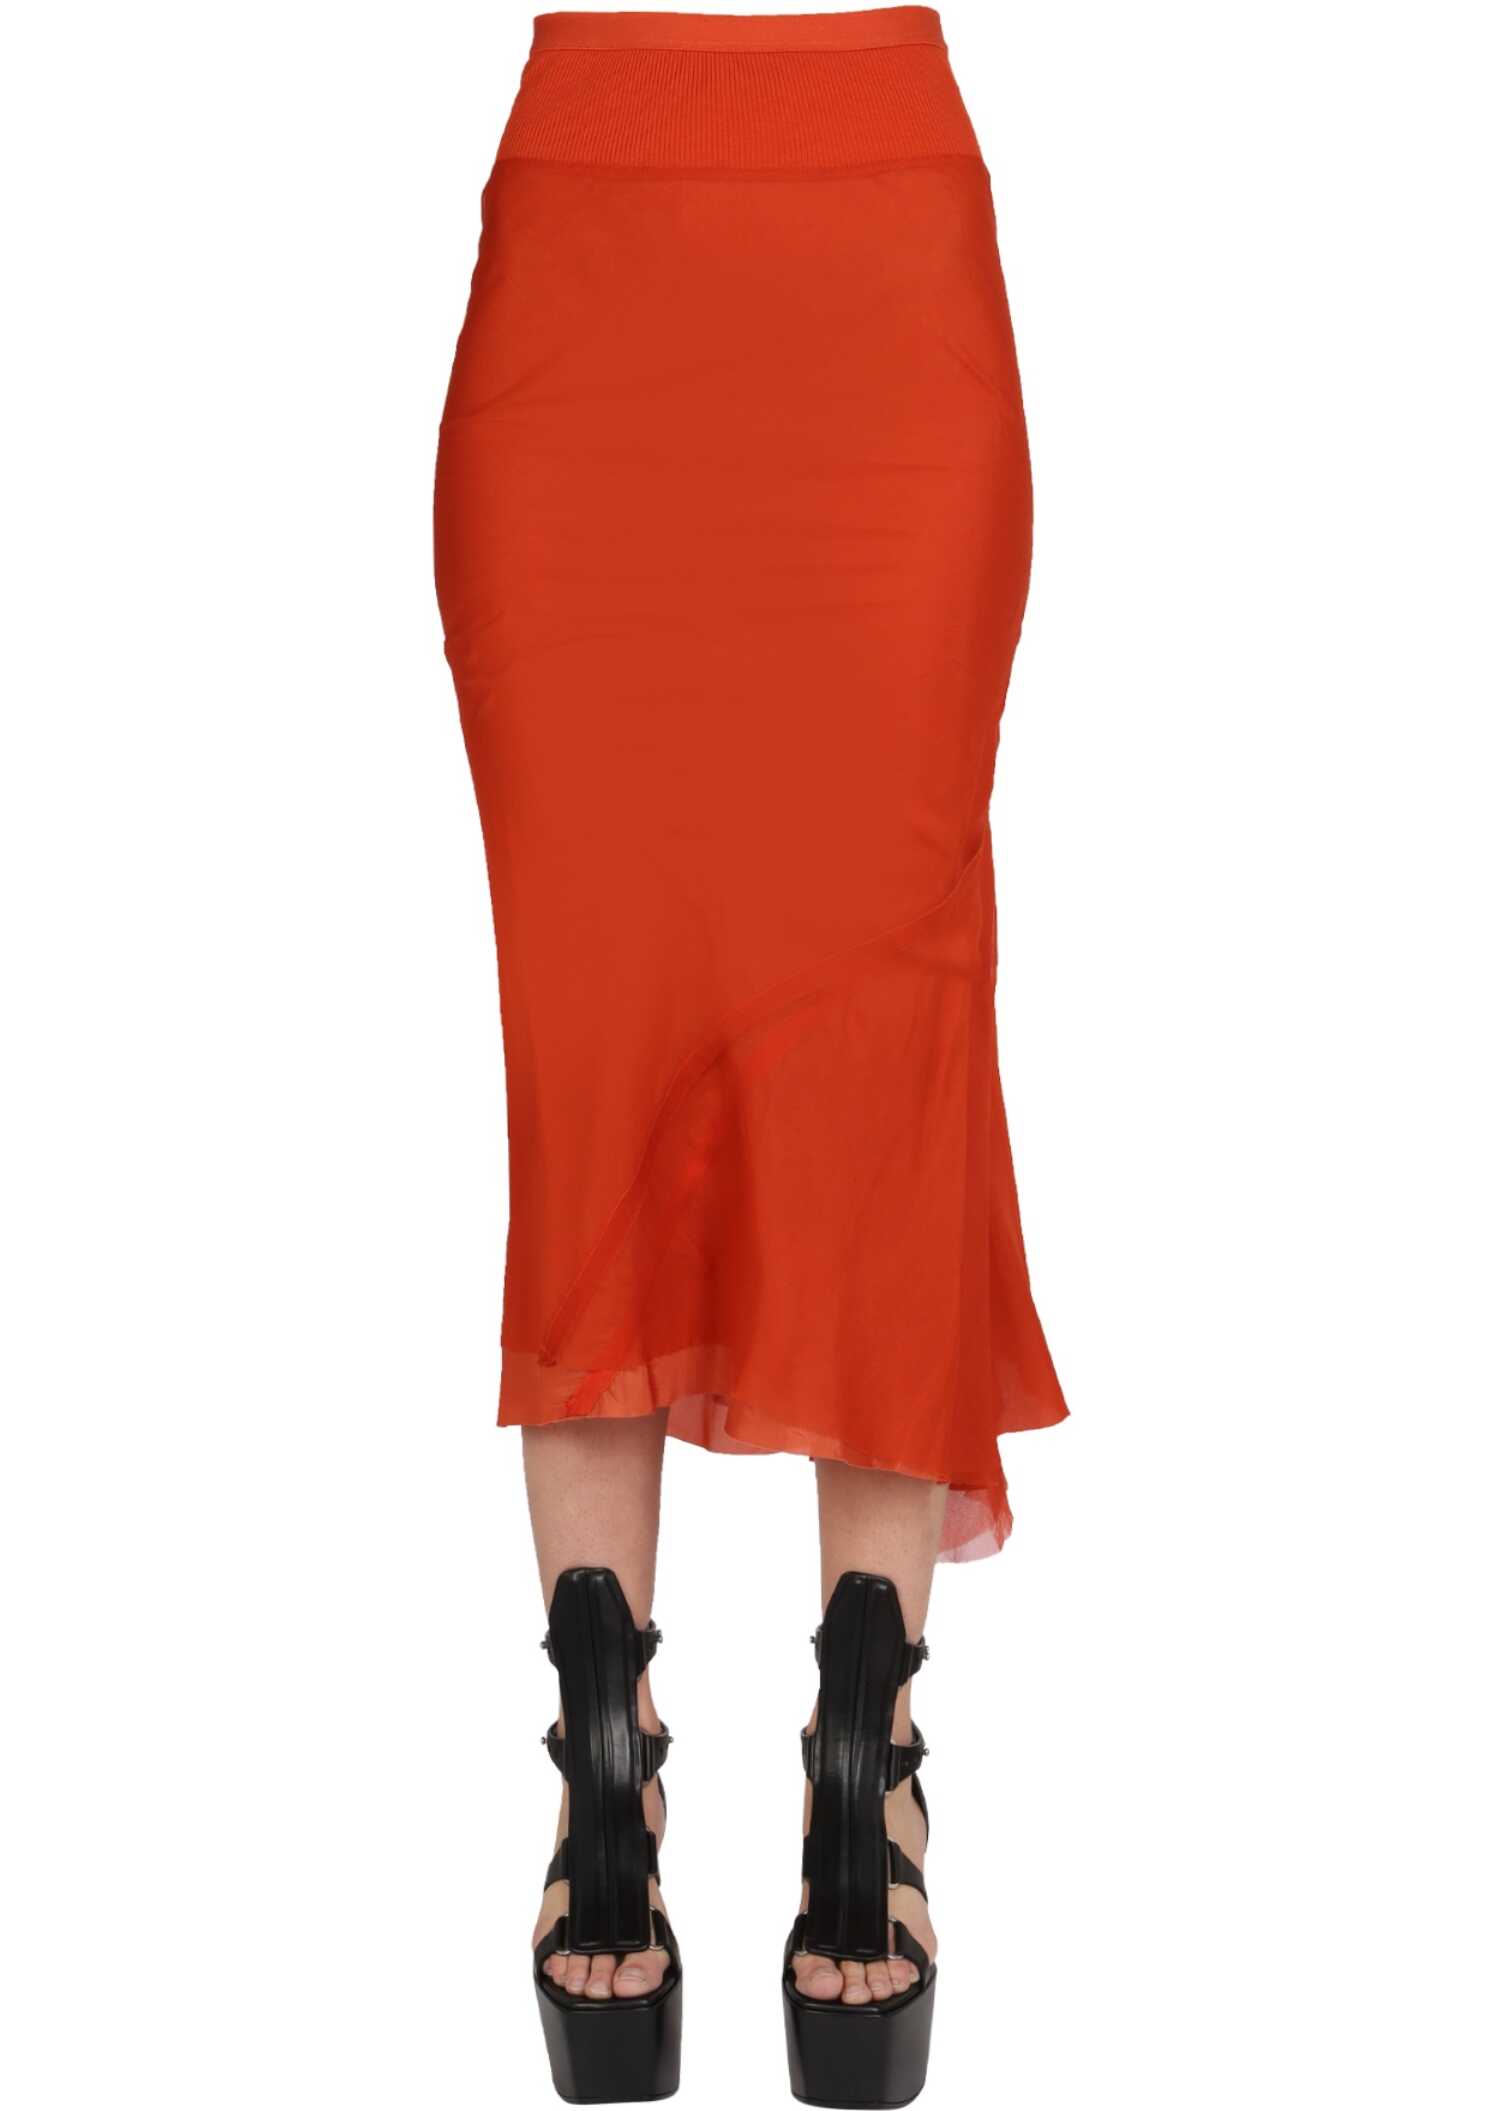 Rick Owens Relaxed Fit Skirt ORANGE image0